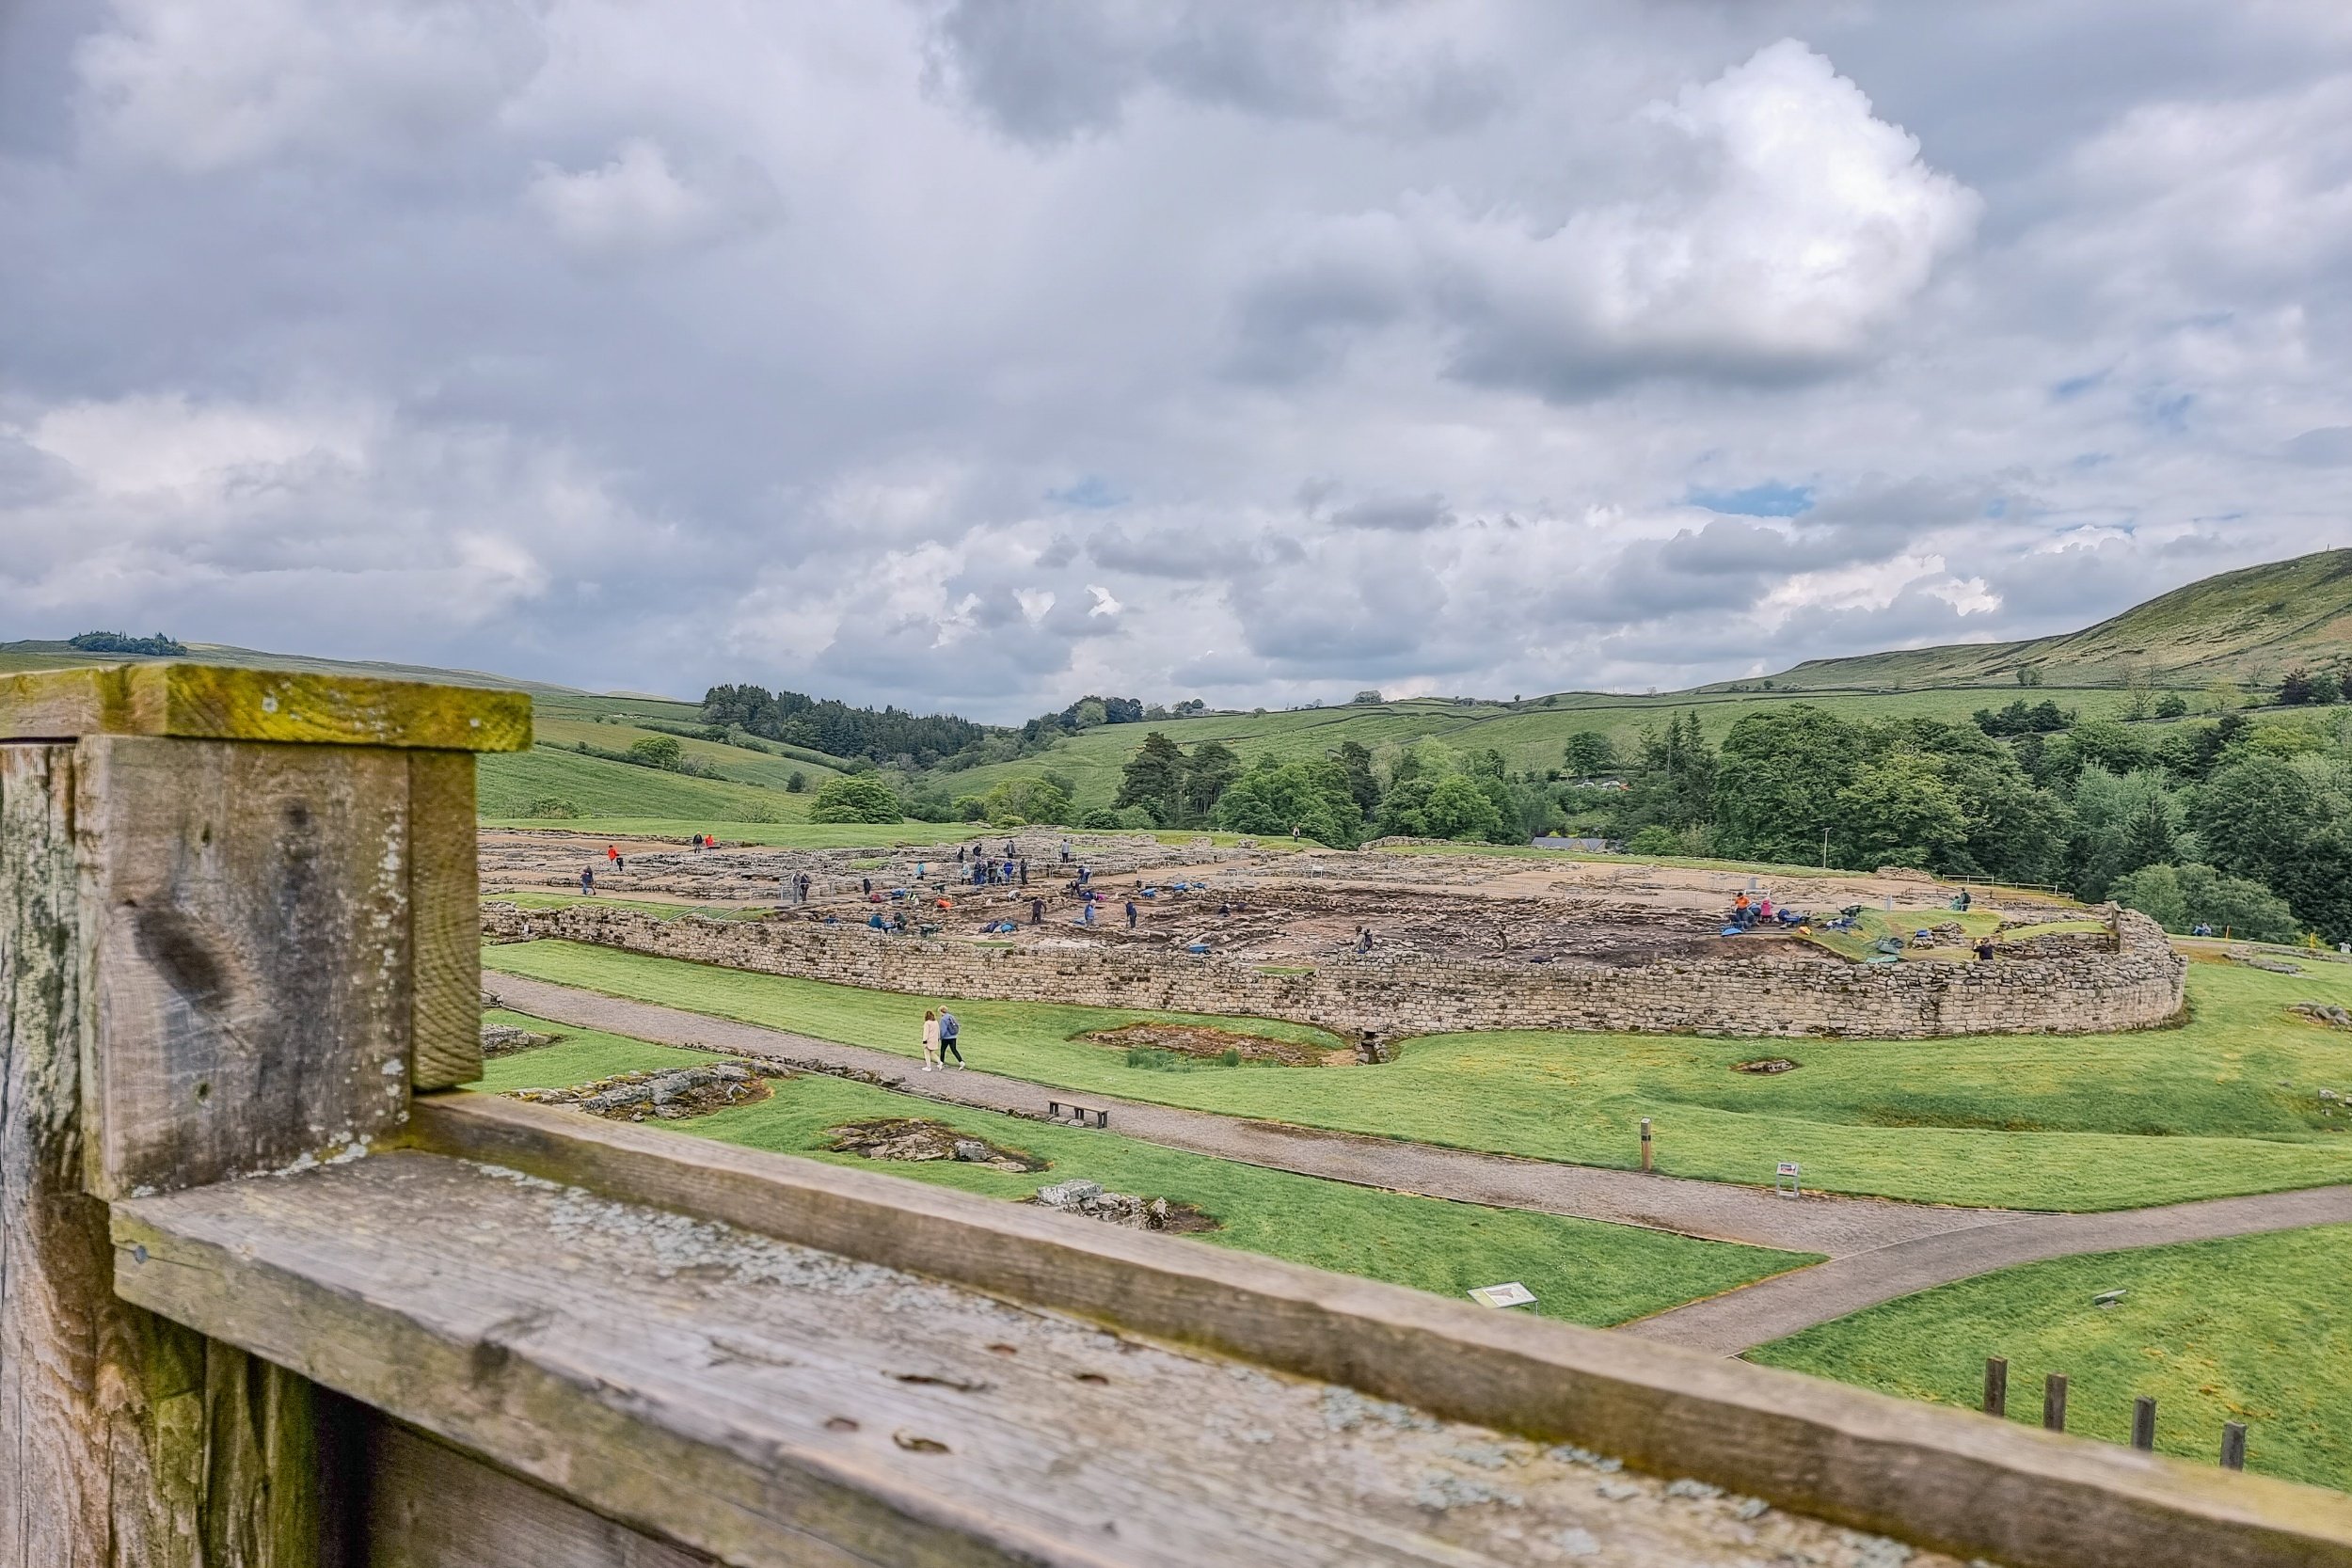 The view from the replica wooden fort at Vindolanda 